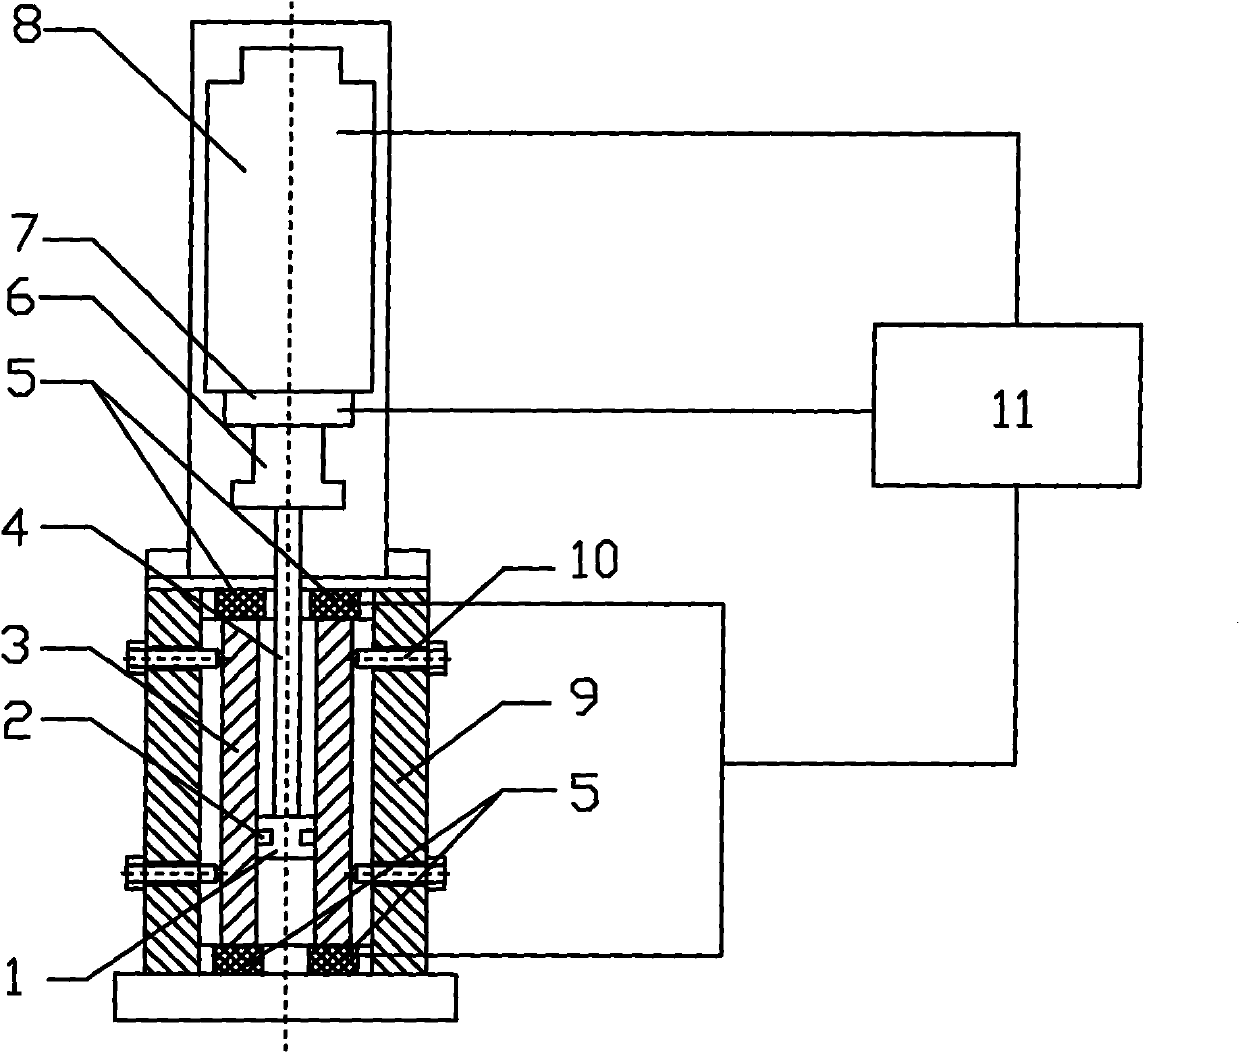 System for accurately testing friction damping